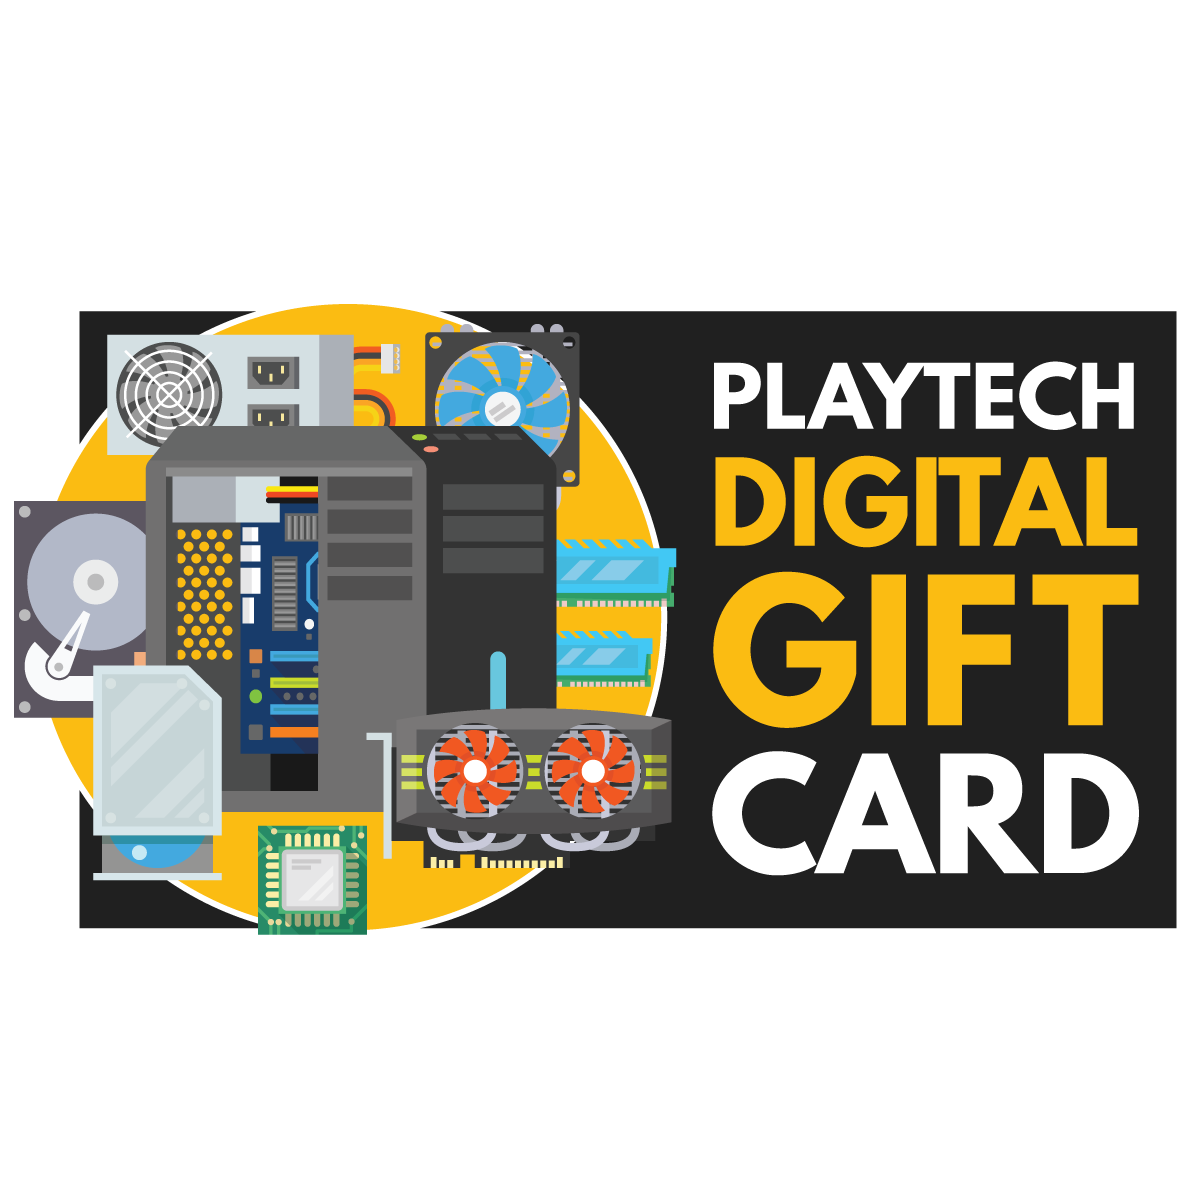 Playtech Gift Cards $10 - Digital Delivery Only - Playtech